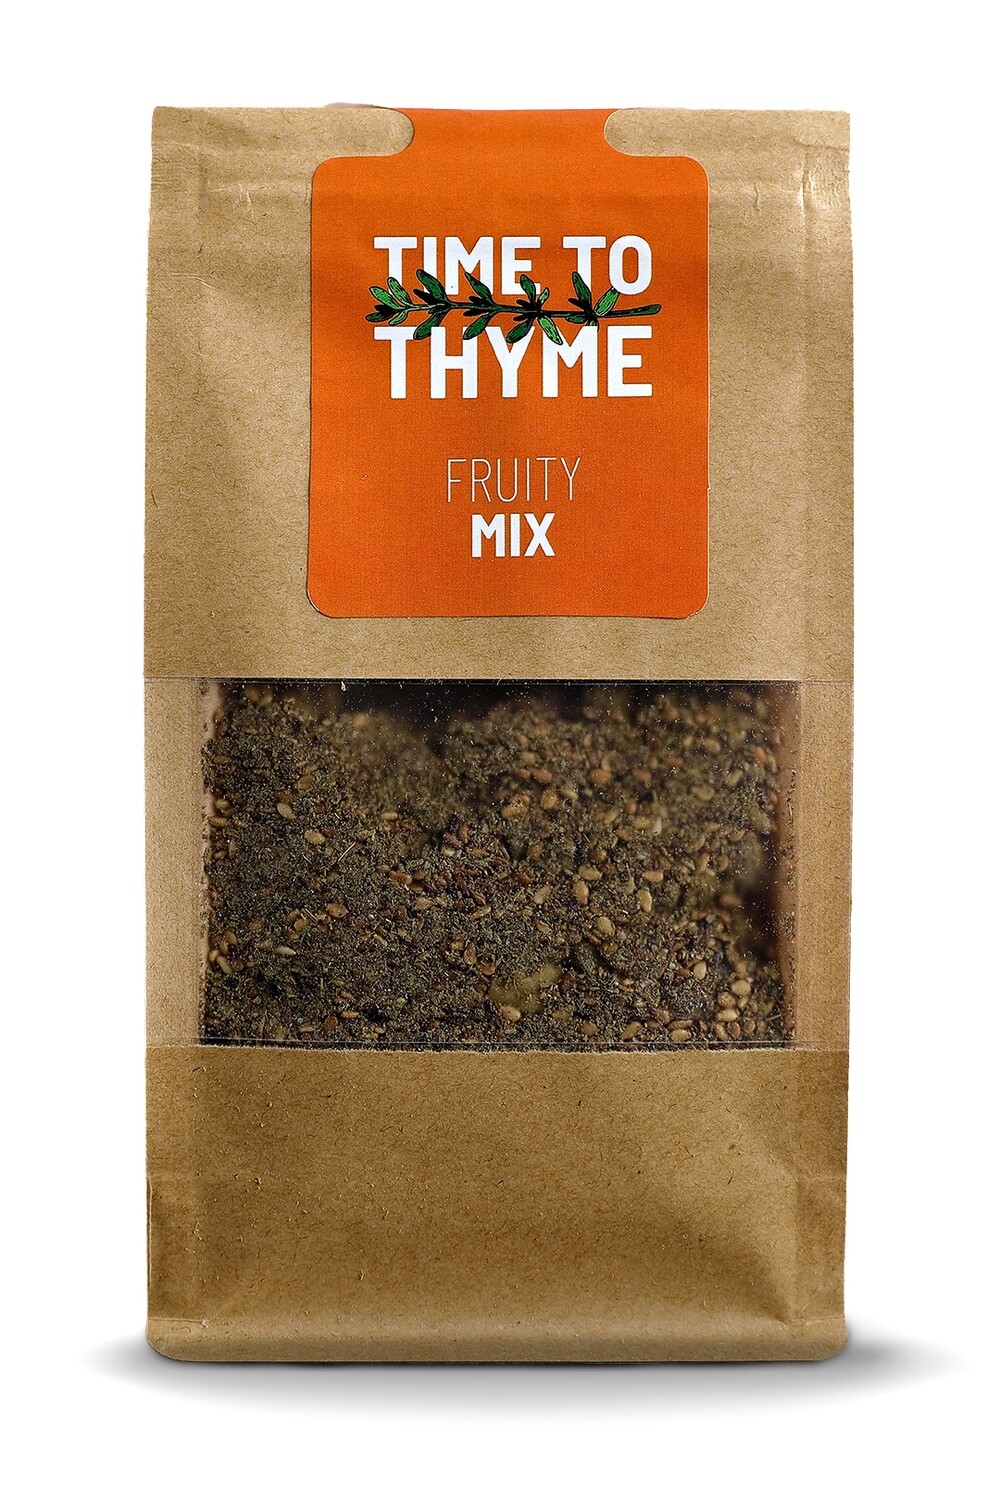 Thyme / Zaatar Fruity Mix (Bag) - Time to Thyme